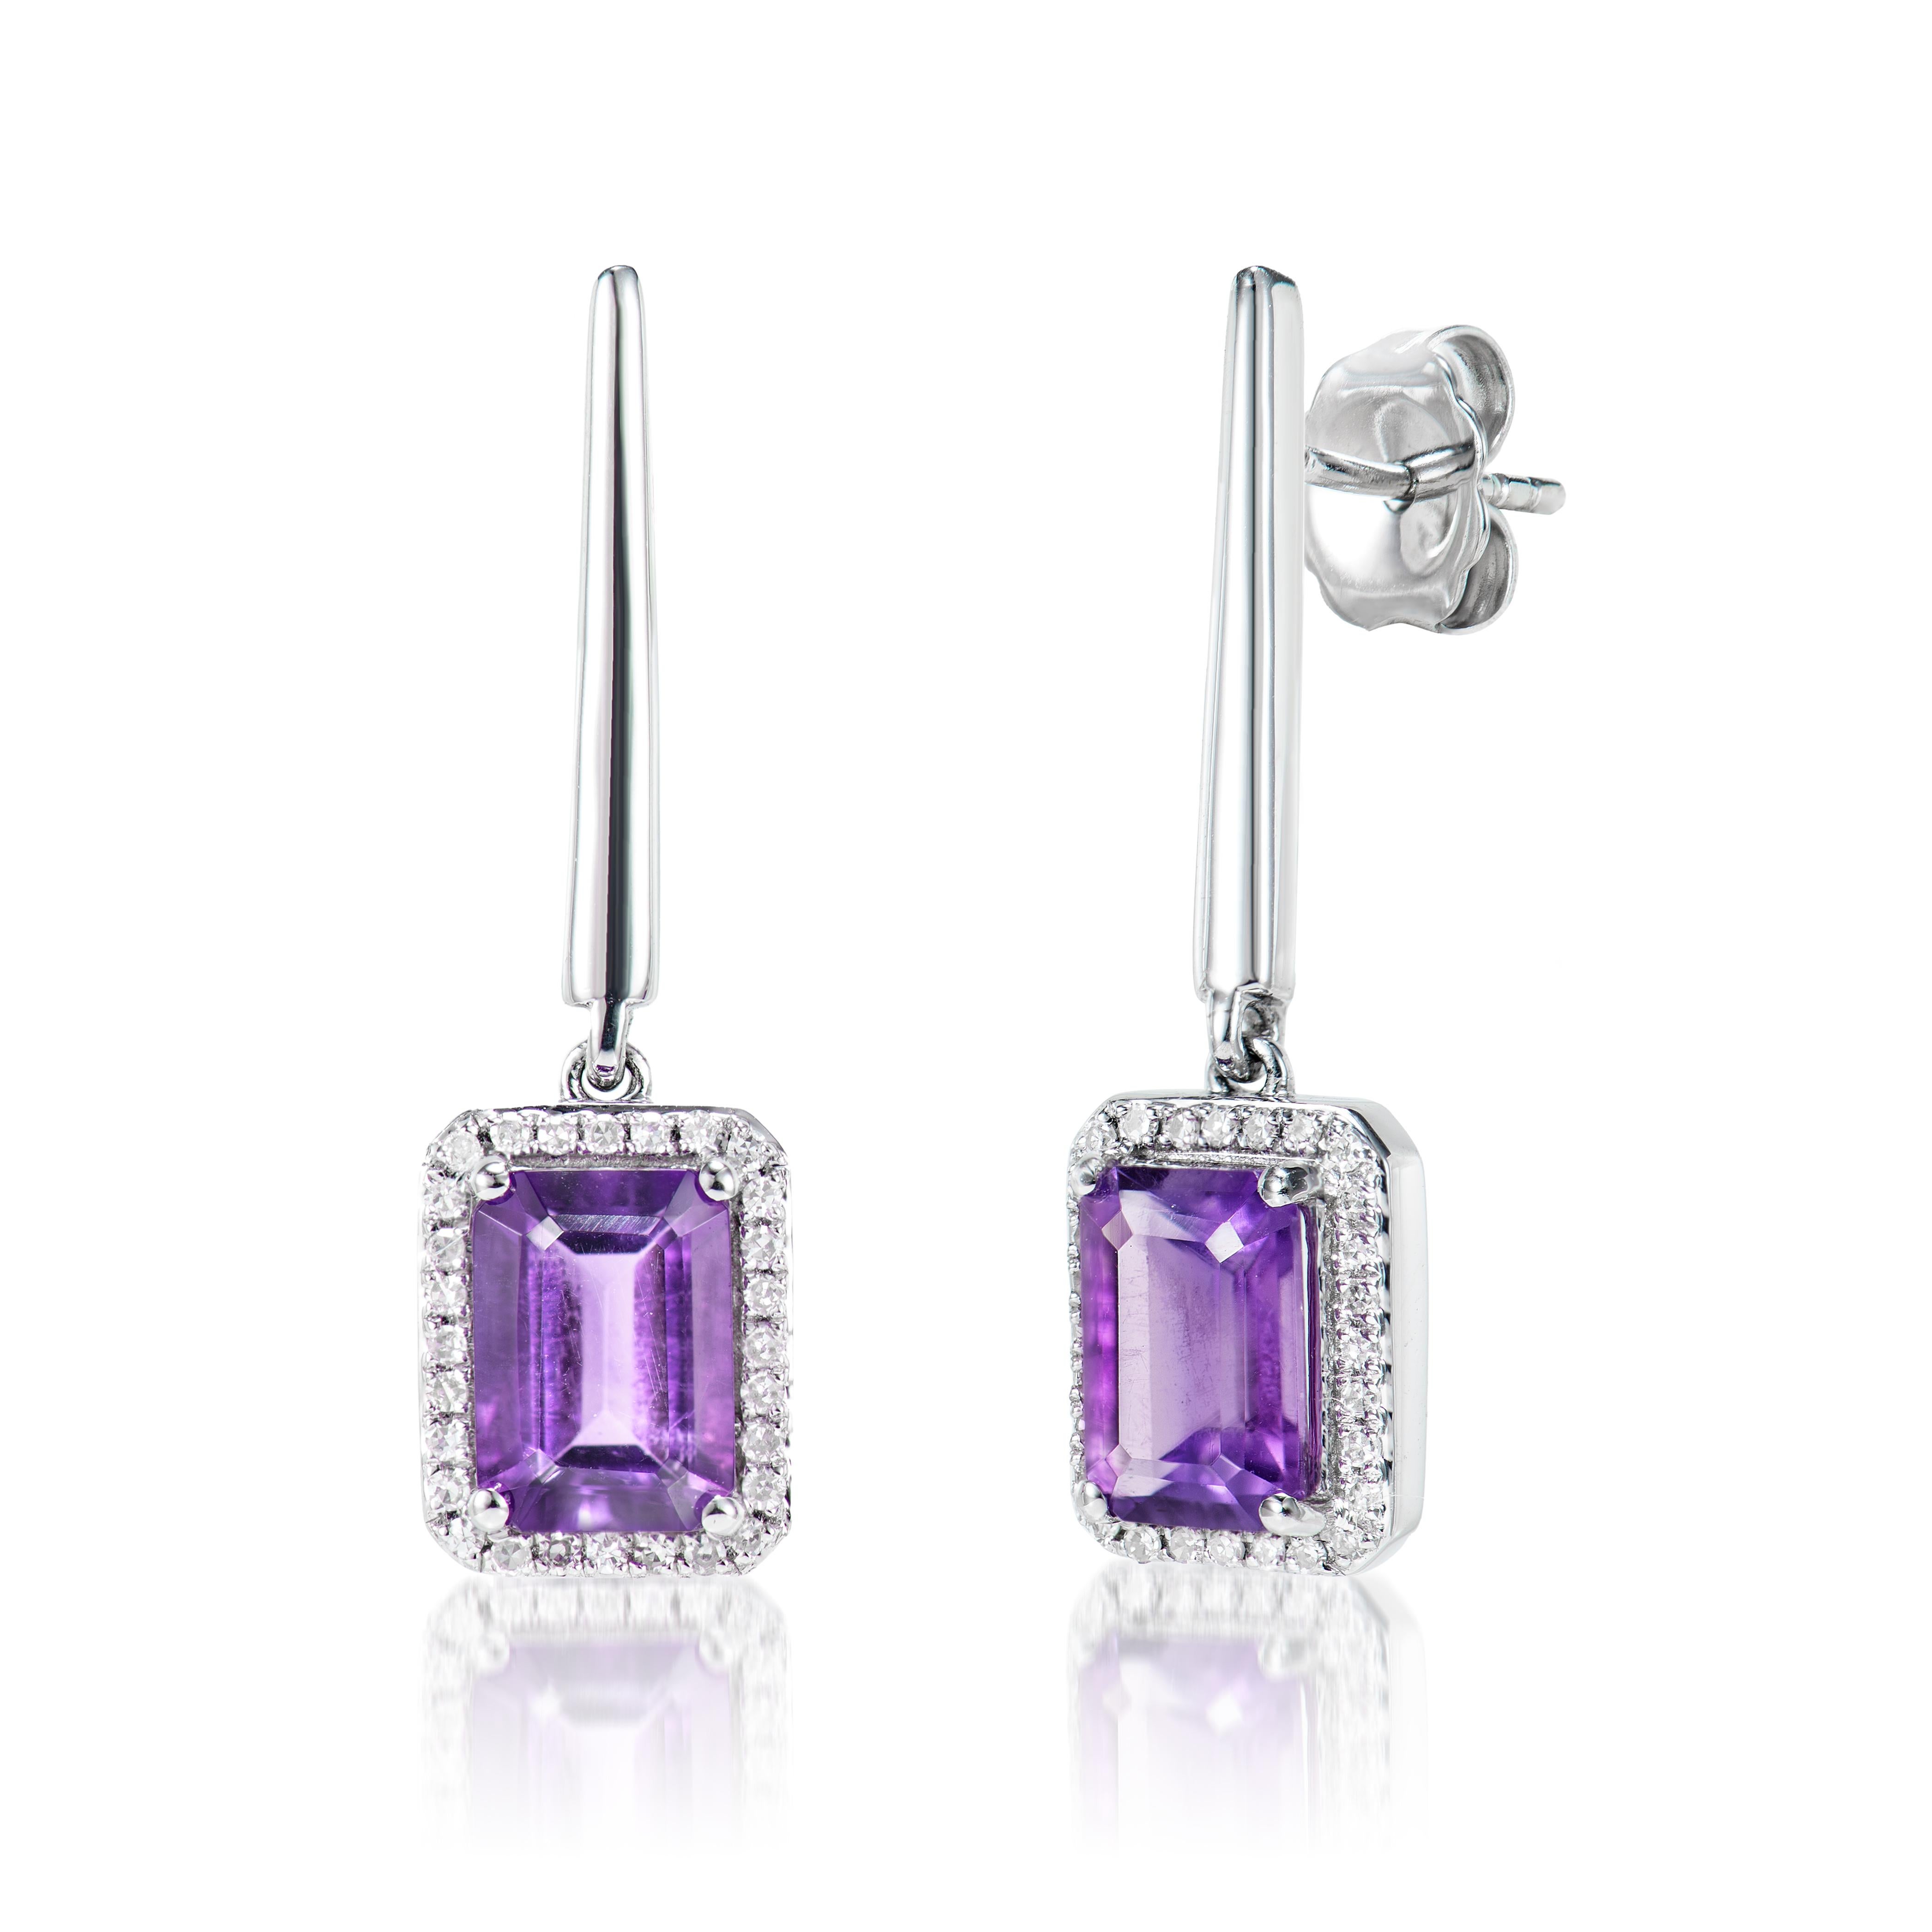 Octagon Cut 1.76 Carat Amethyst Drop Earrings in 18Karat White Gold with White Diamond. For Sale